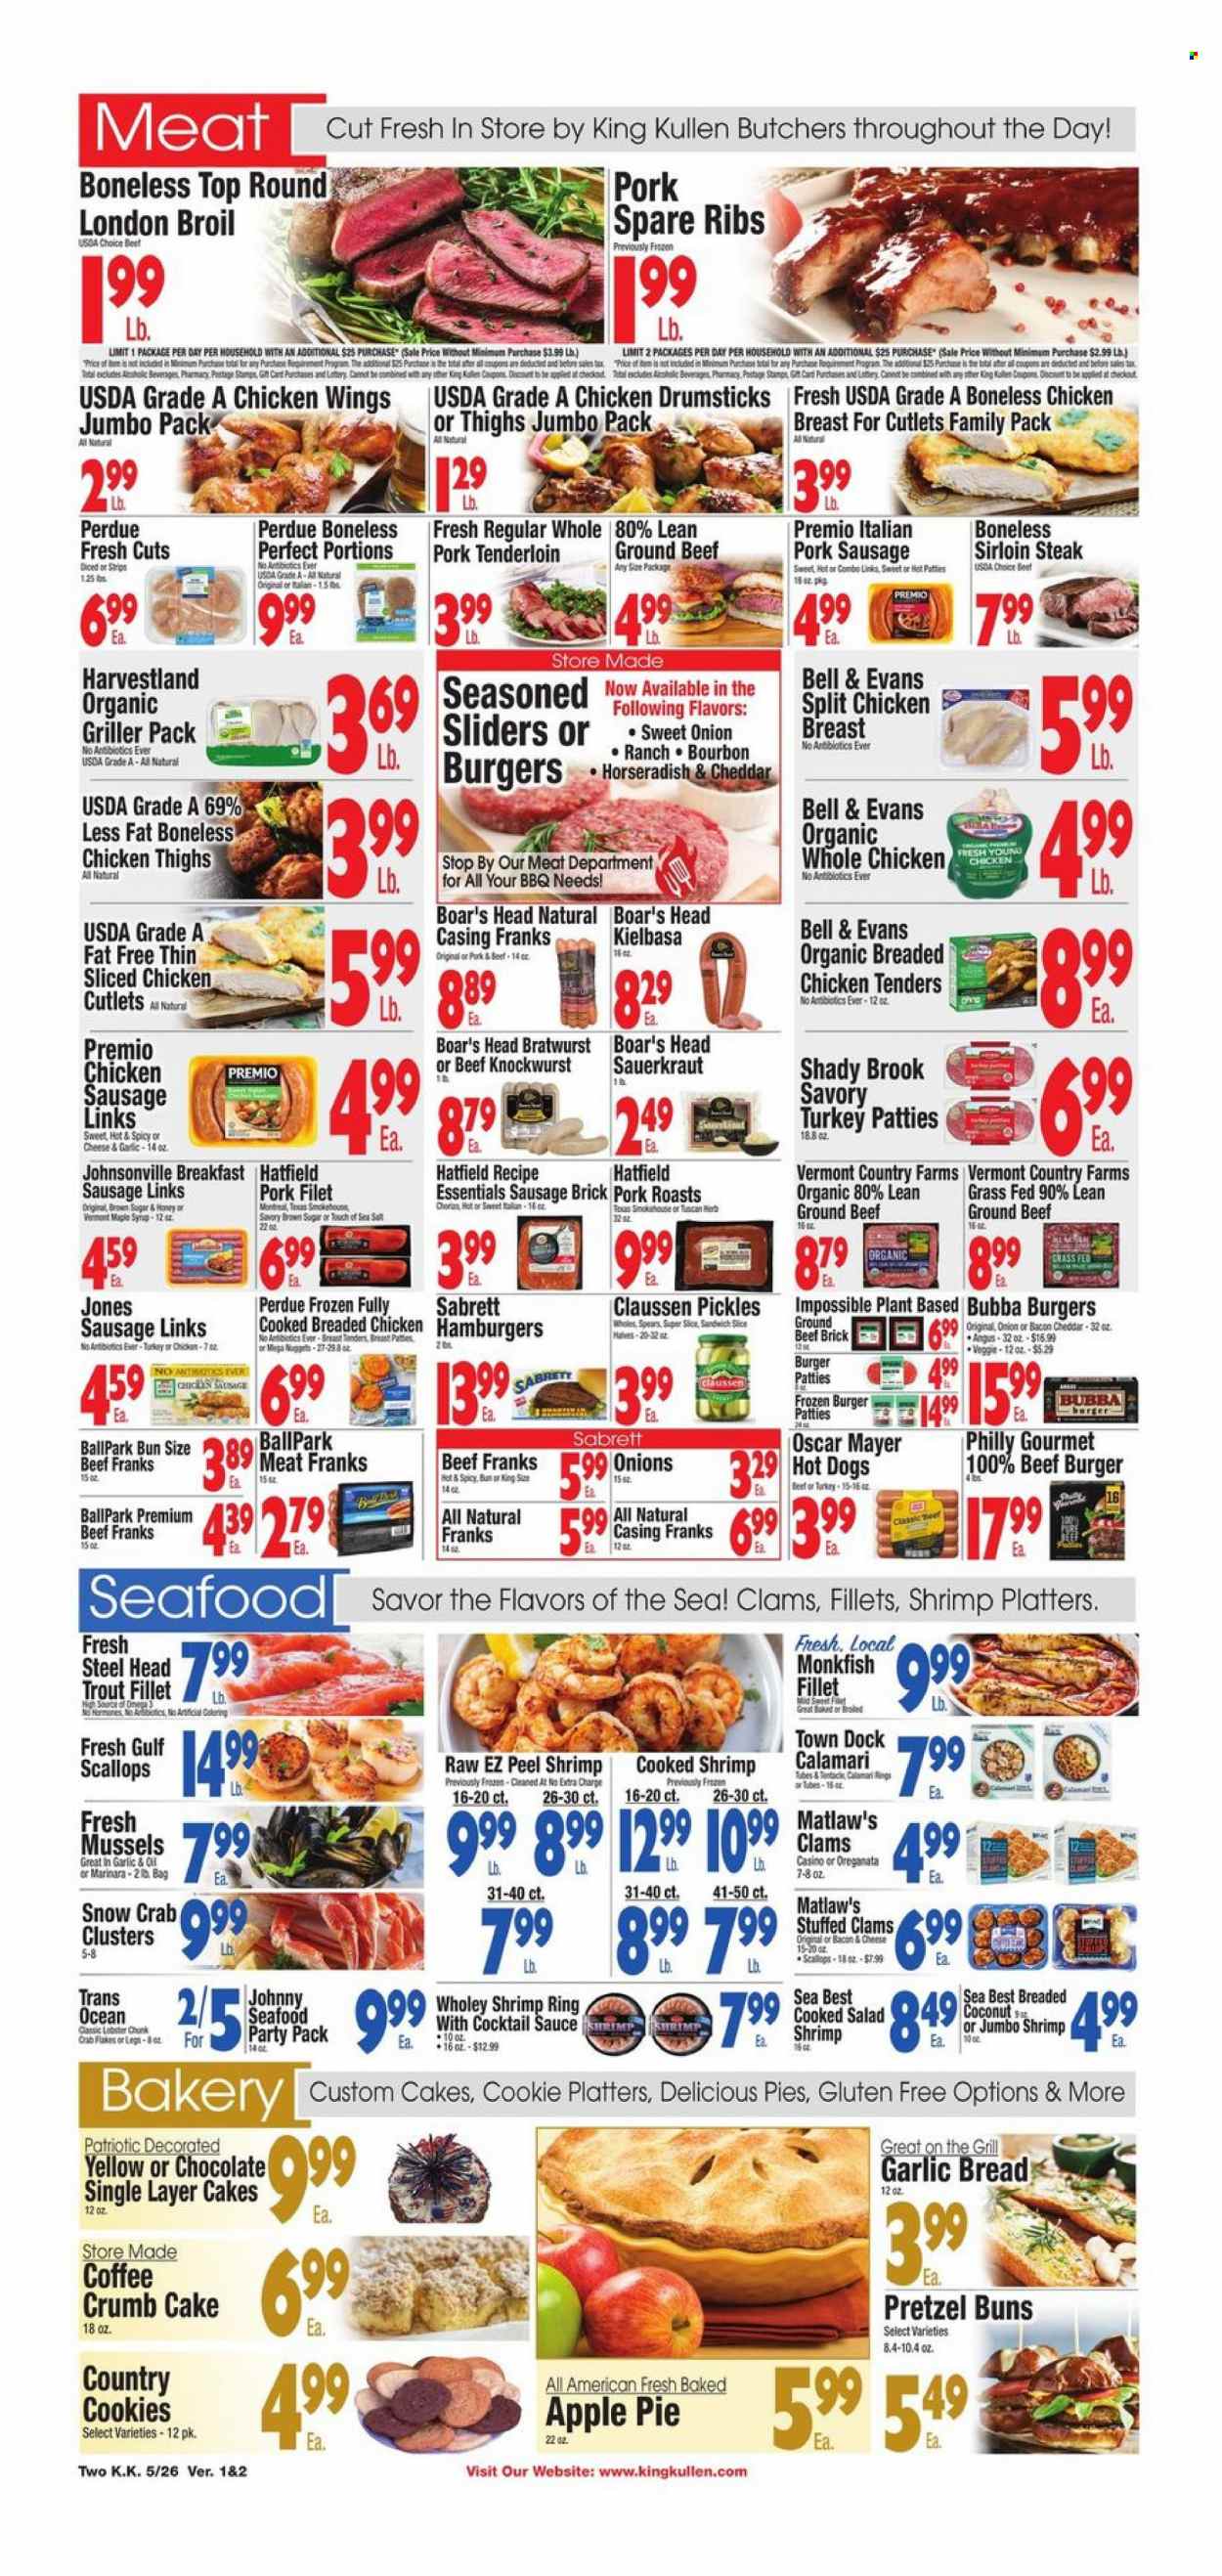 thumbnail - King Kullen Flyer - 05/26/2023 - 06/01/2023 - Sales products - bread, pretzels, cake, buns, apple pie, horseradish, onion, calamari, clams, monkfish, mussels, scallops, trout, seafood, crab, shrimps, crab clusters, hot dog, nuggets, hamburger, sauce, fried chicken, beef burger, Perdue®, Boar's Head, ready meal, chorizo, Johnsonville, Oscar Mayer, bratwurst, sausage, pork sausage, chicken sausage, kielbasa, frankfurters, chicken wings, strips, cookies, chocolate, cane sugar, sea salt, sauerkraut, pickles, pickled cabbage, cocktail sauce, maple syrup, syrup, coffee, alcohol, bourbon, beer, whole chicken, chicken breasts, chicken cutlets, chicken thighs, chicken drumsticks, turkey, beef meat, beef sirloin, ground beef, steak, sirloin steak, ribs, burger patties, pork meat, pork ribs, pork tenderloin, pork spare ribs. Page 2.